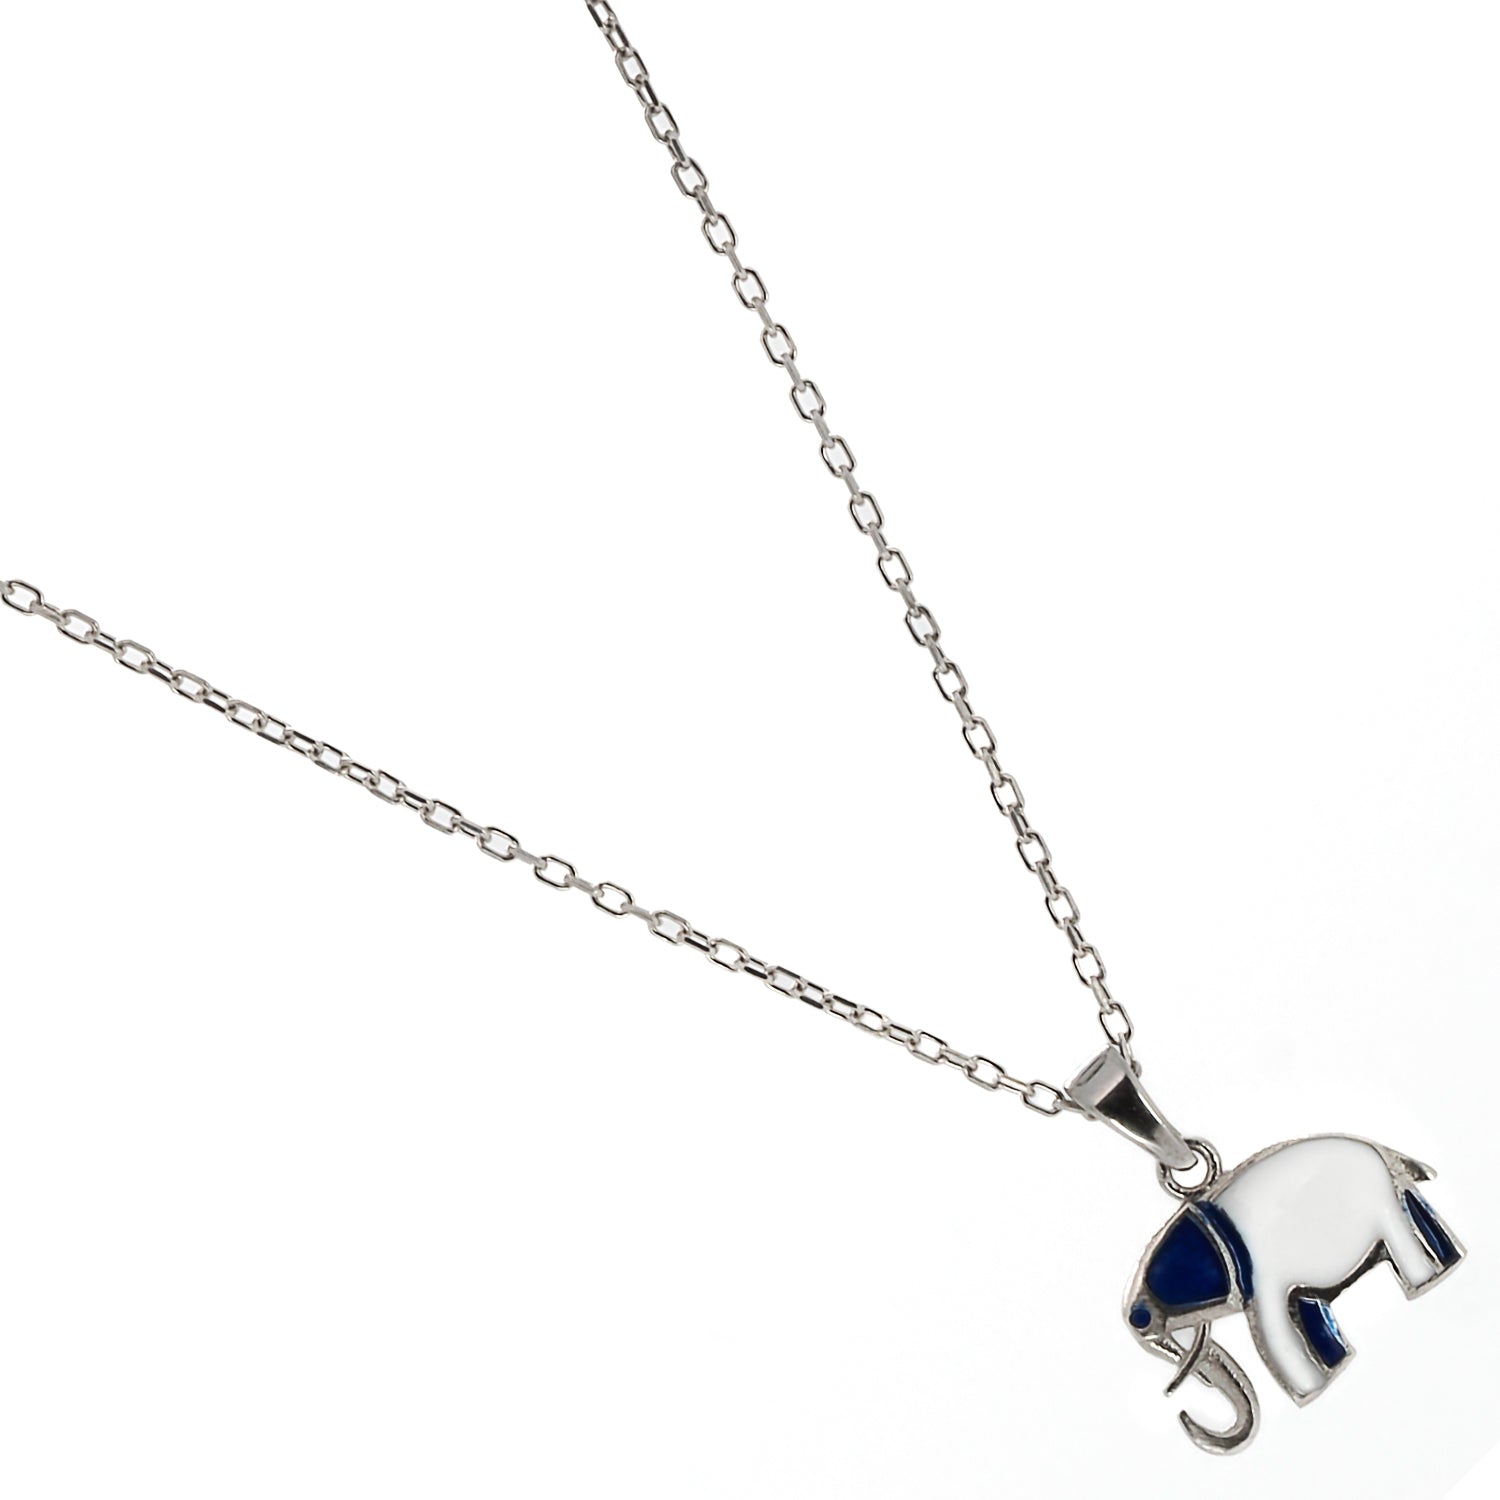 Sterling Silver Blue Elephant Necklace, a meaningful accessory handcrafted with care and attention to detail.